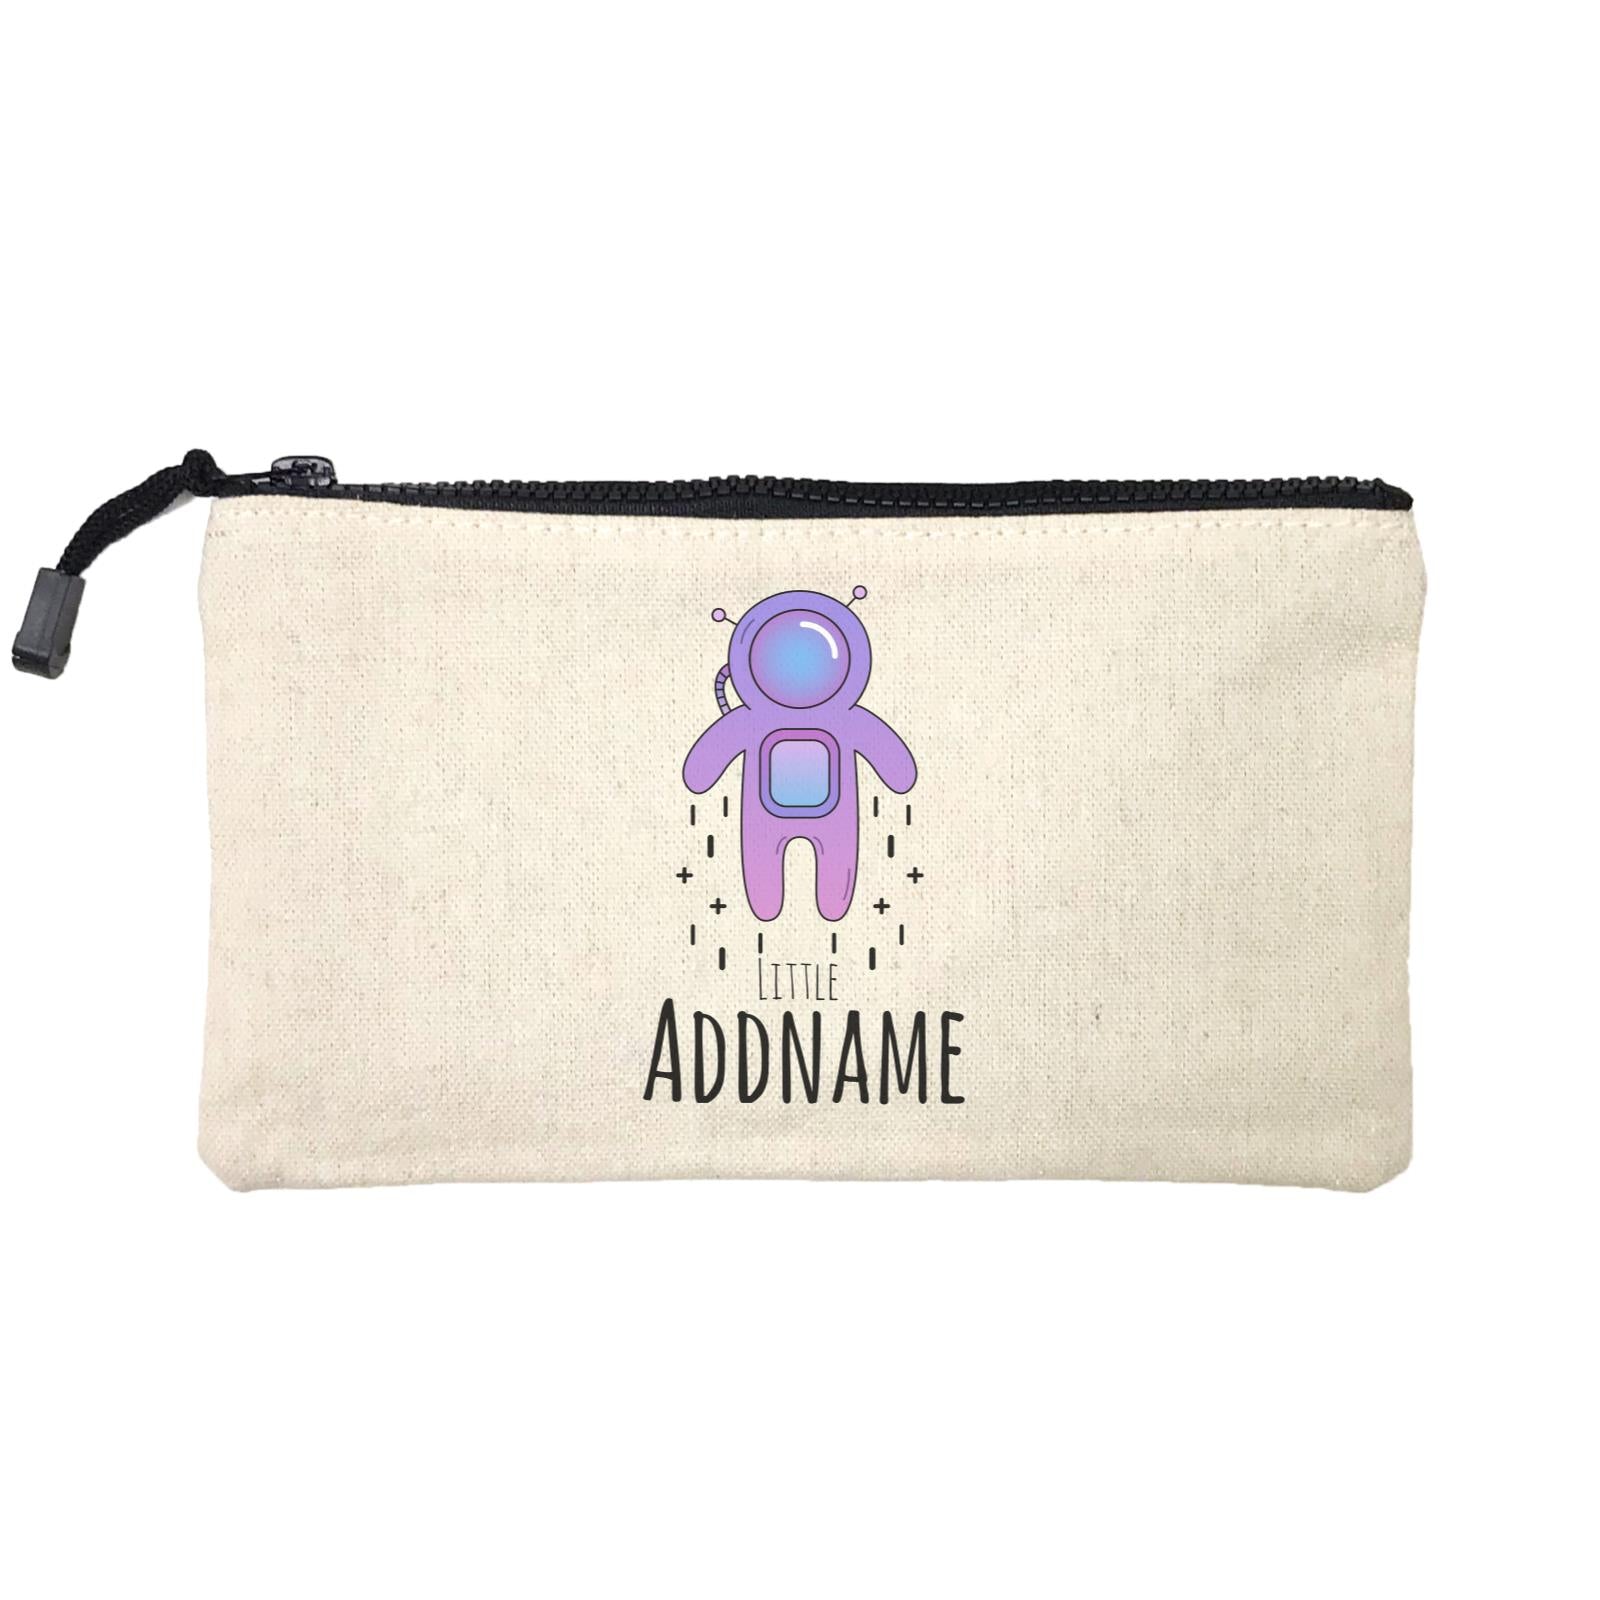 Drawn Newborn Element Space Guy Addname Mini Accessories Stationery Pouch